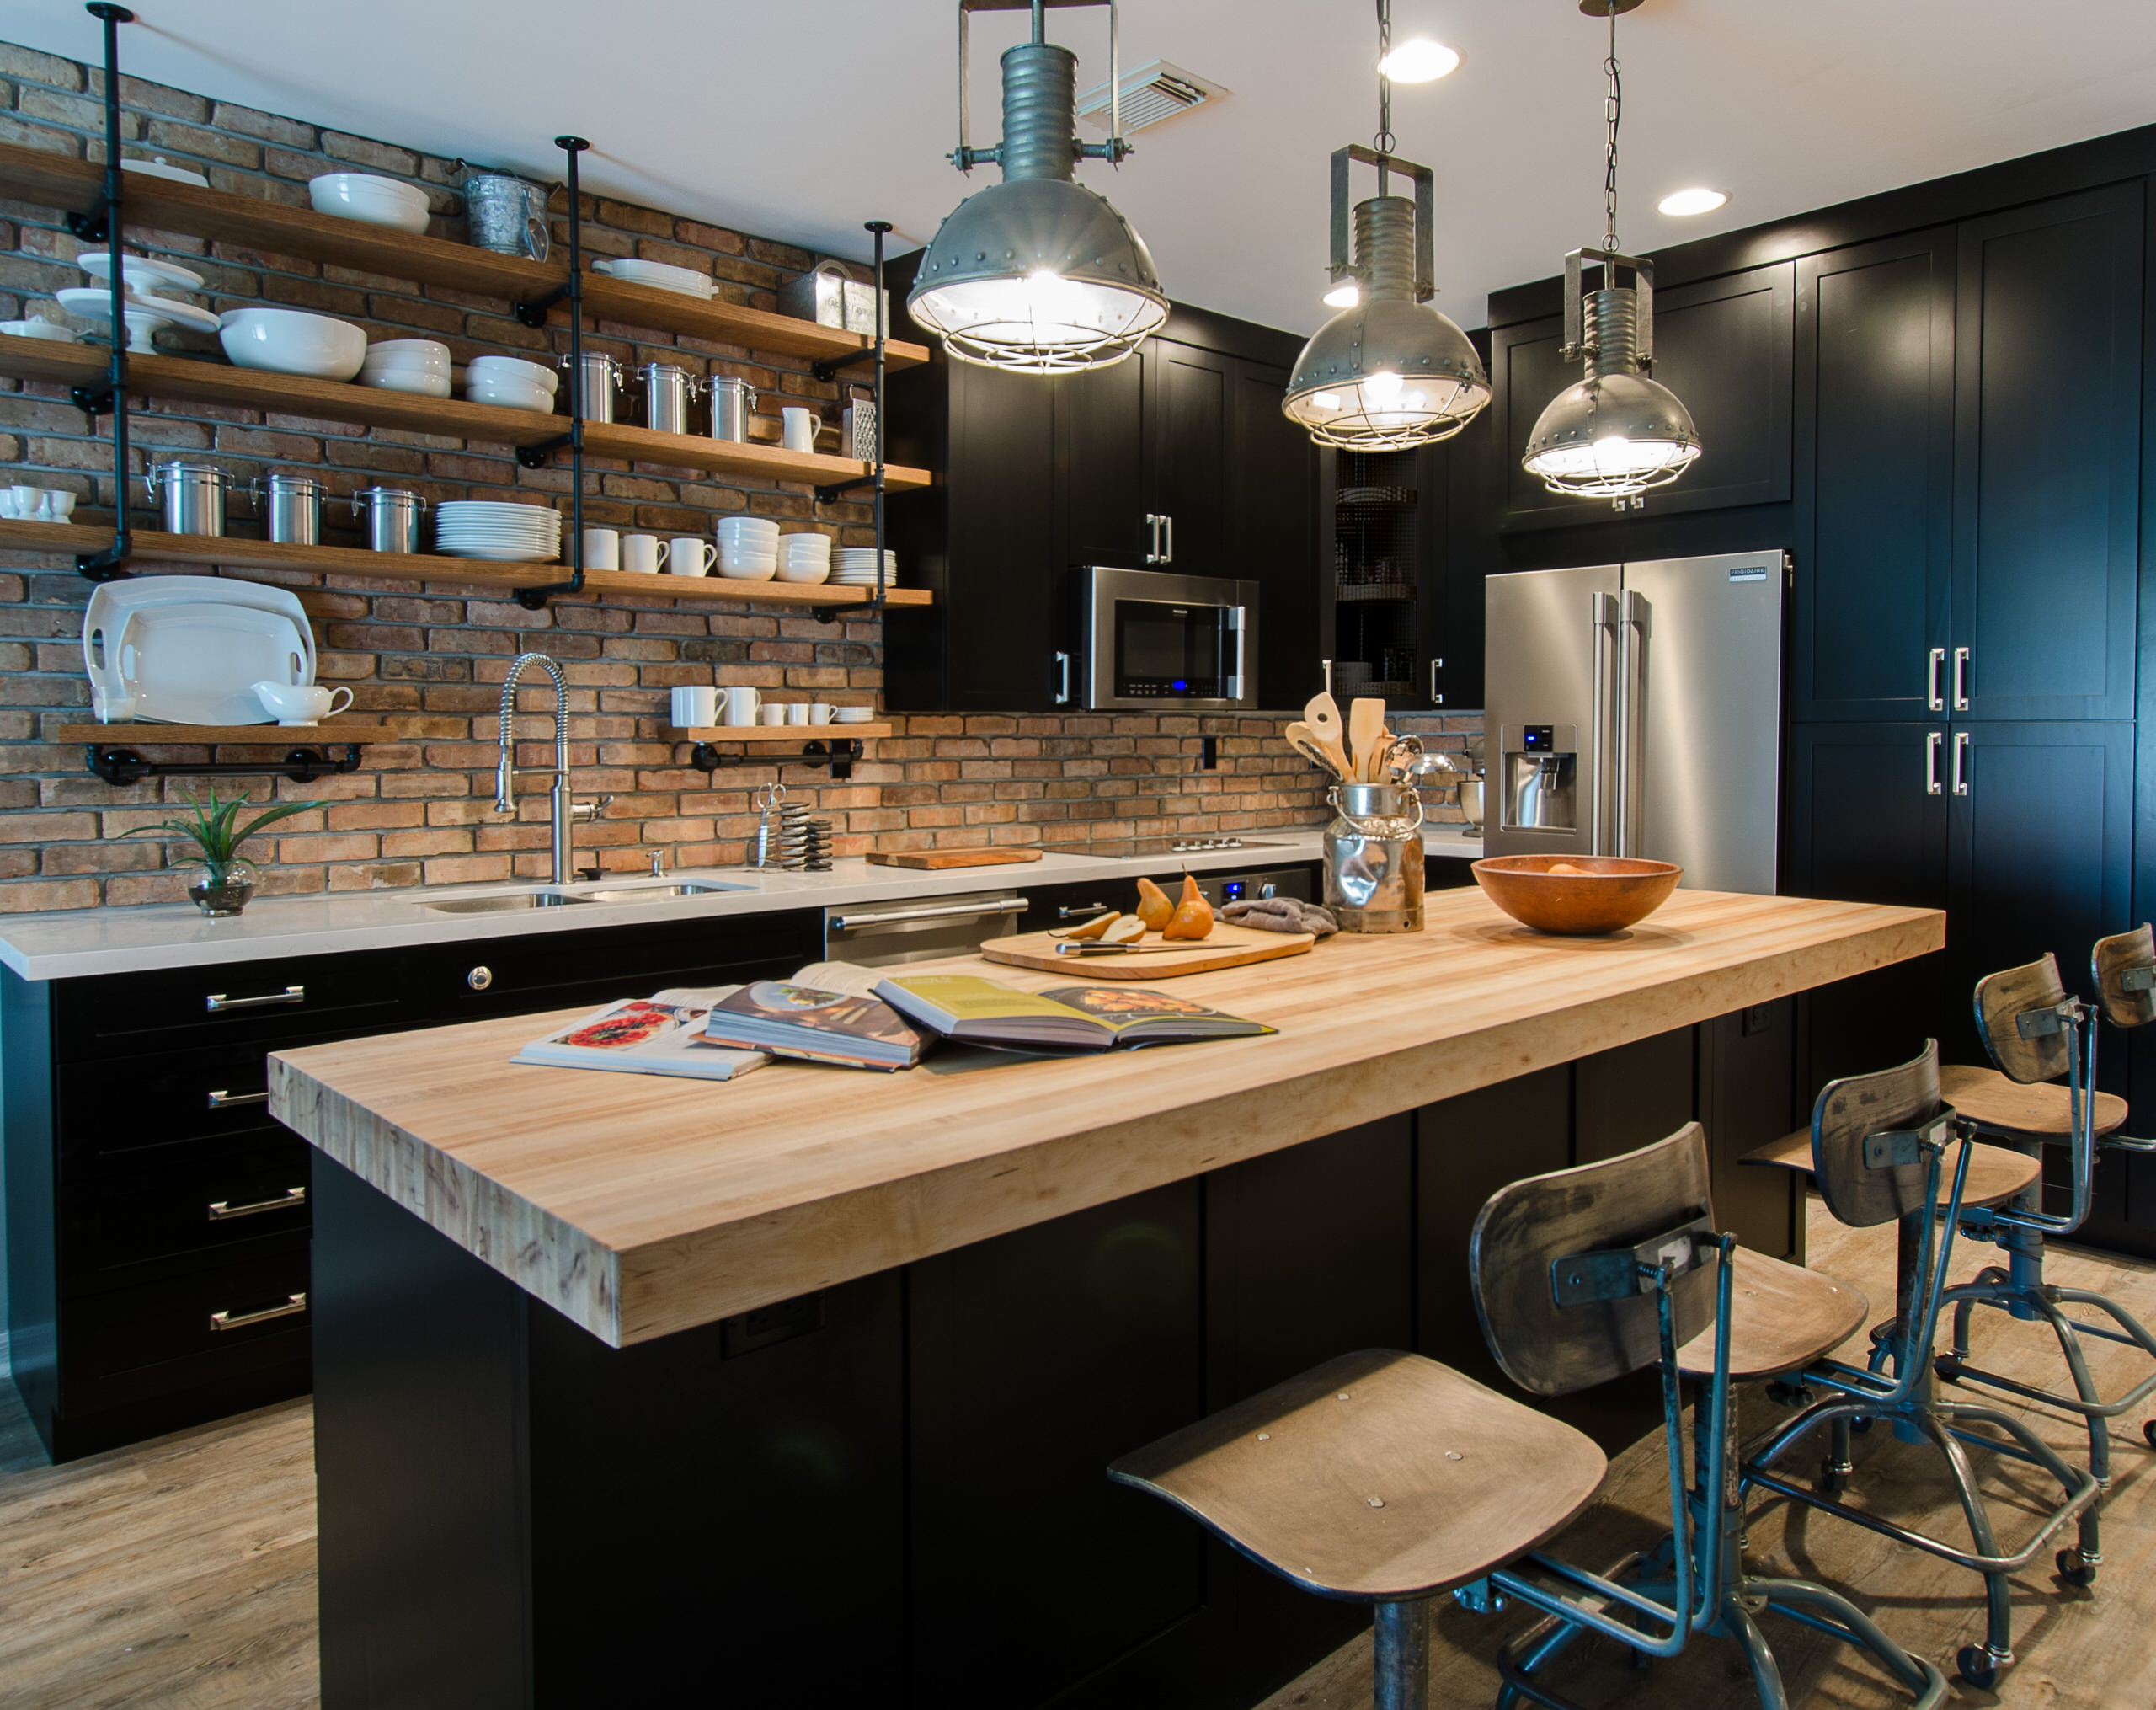 14 Concrete Countertop Ideas for a Stylish Industrial Kitchen